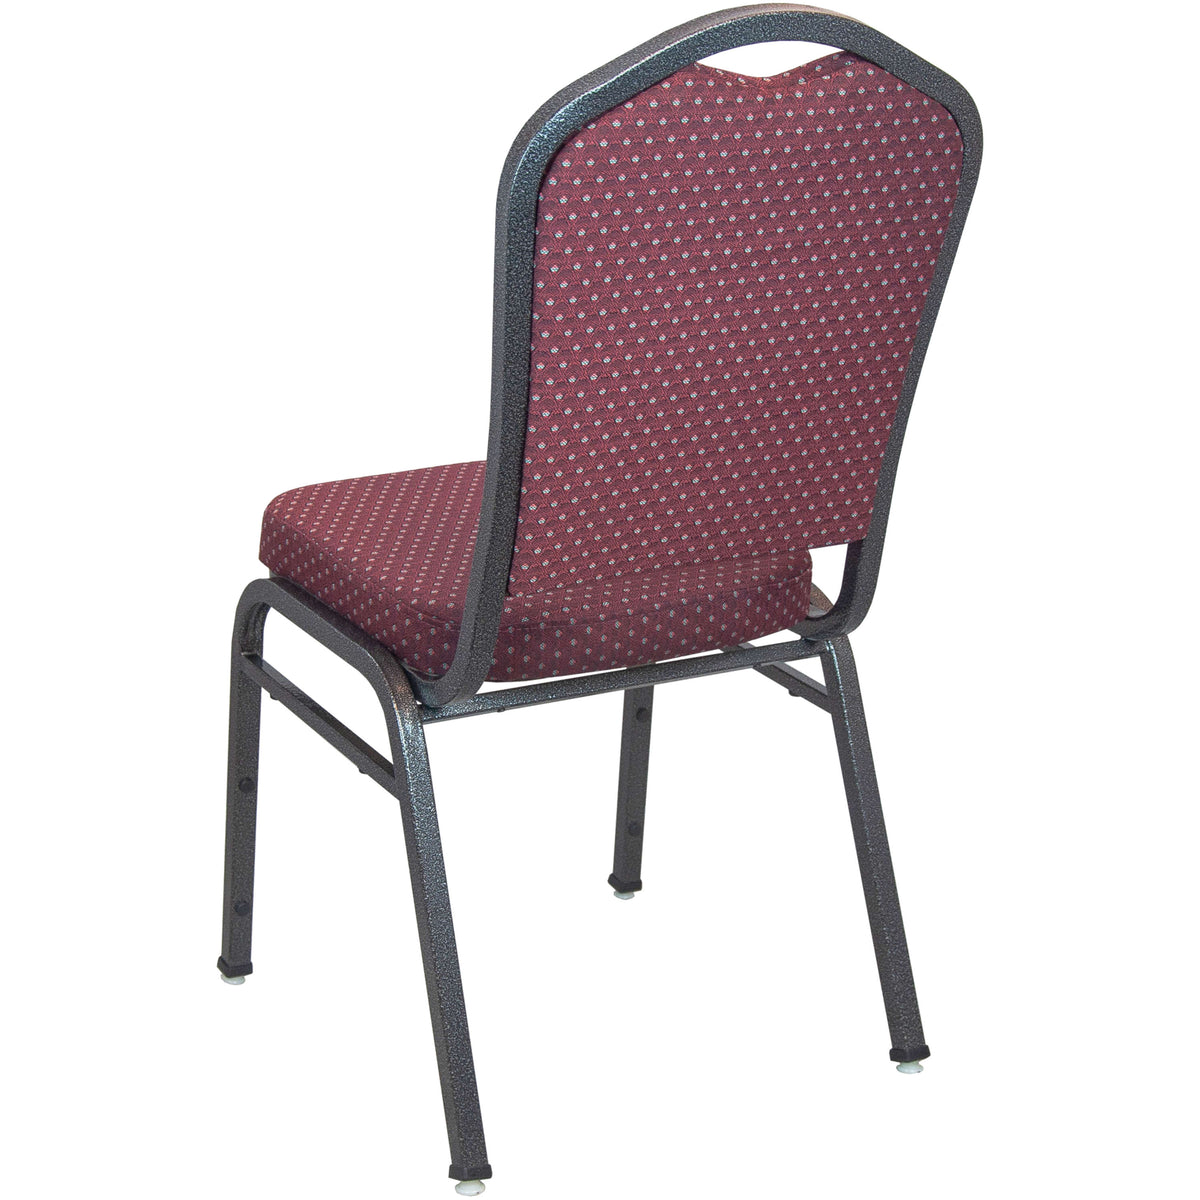 Burgundy Patterned Fabric/Silver Vein Frame |#| Premium Burgundy-patterned Crown Back Banquet Chair - Silver Vein